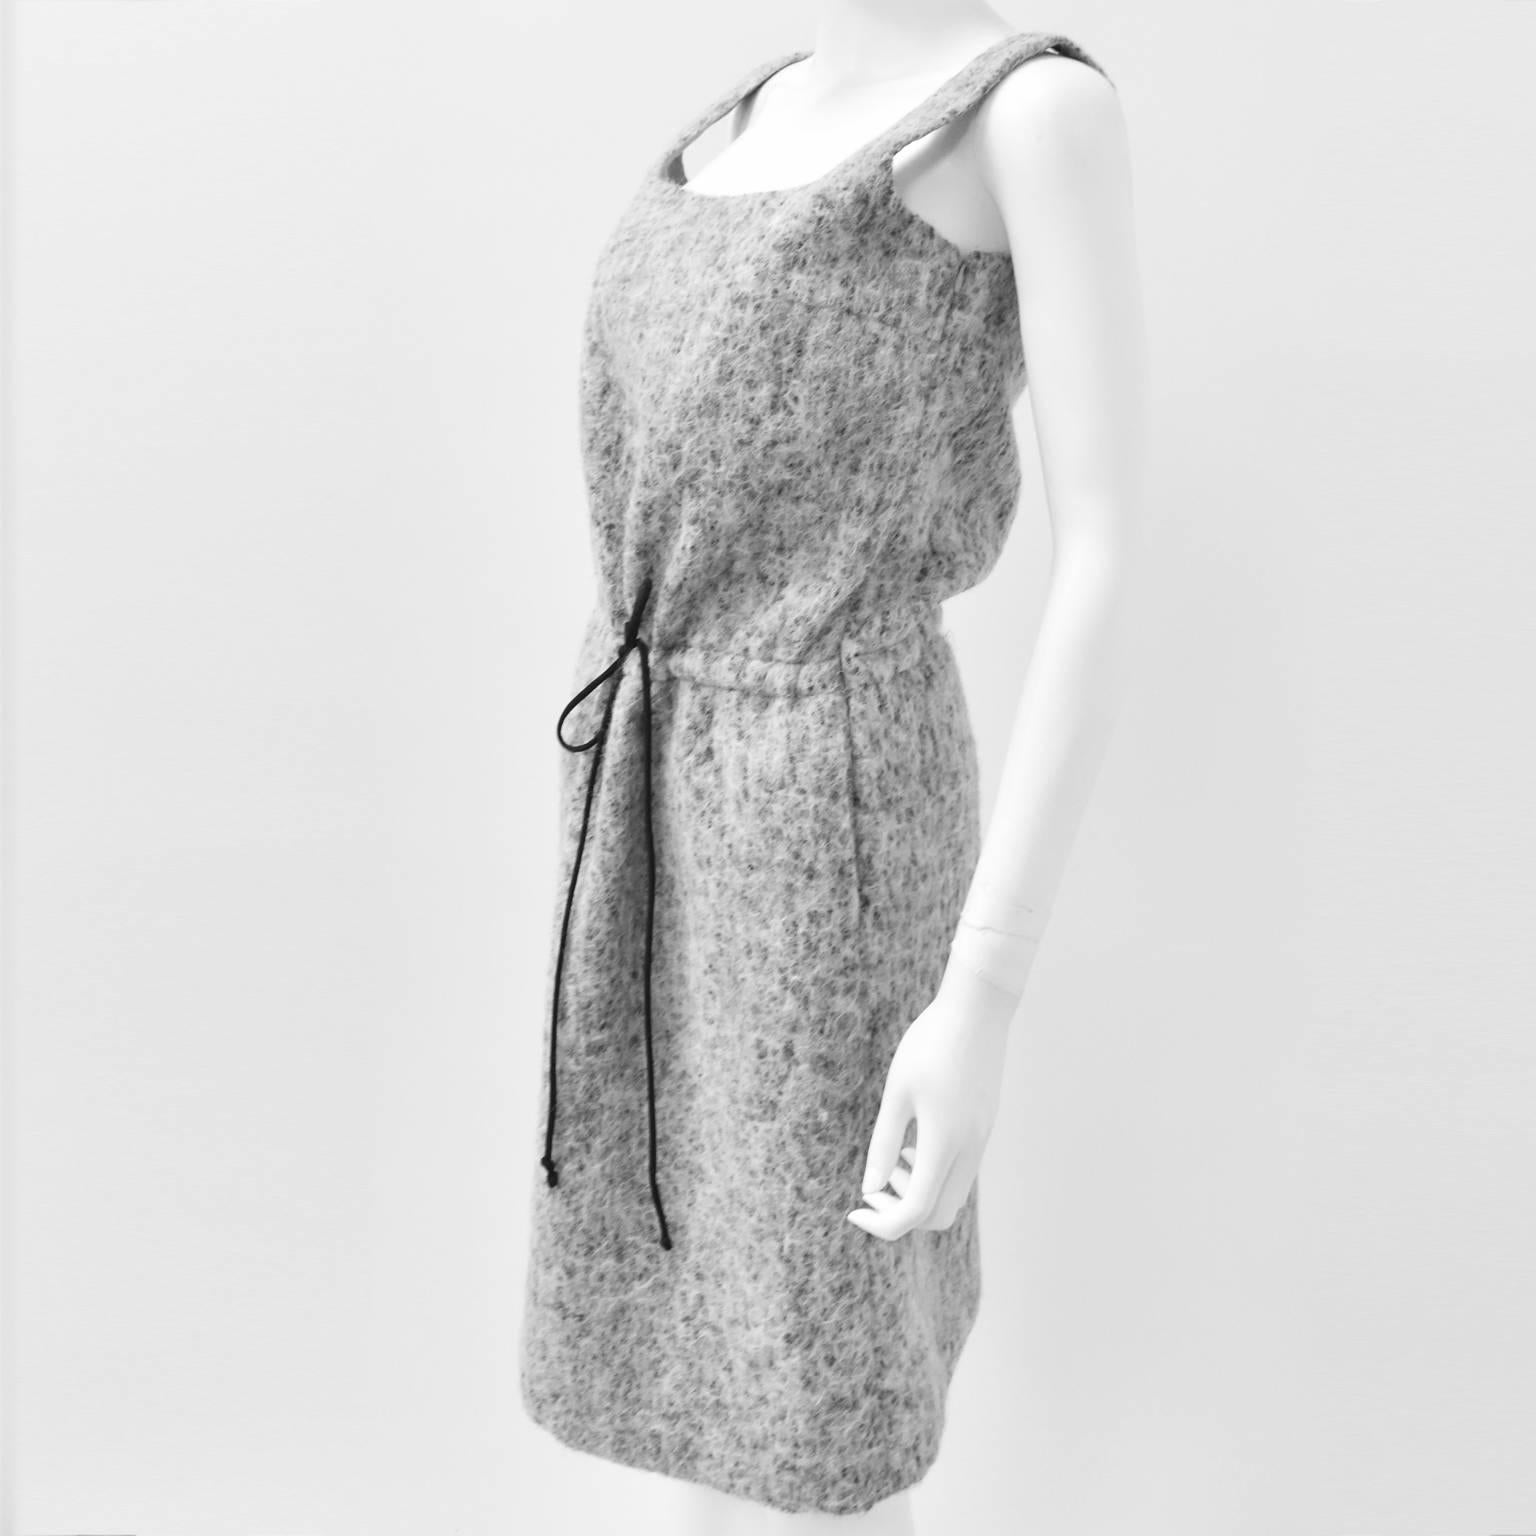 A beautiful Winter dress from Japanese fashion designer Junko Shimada. The dress is made from a textured, thick wool blend and has a simple and modern silhouette. It has a sleeveless design with round neck, and A-line shape that can be cinched with